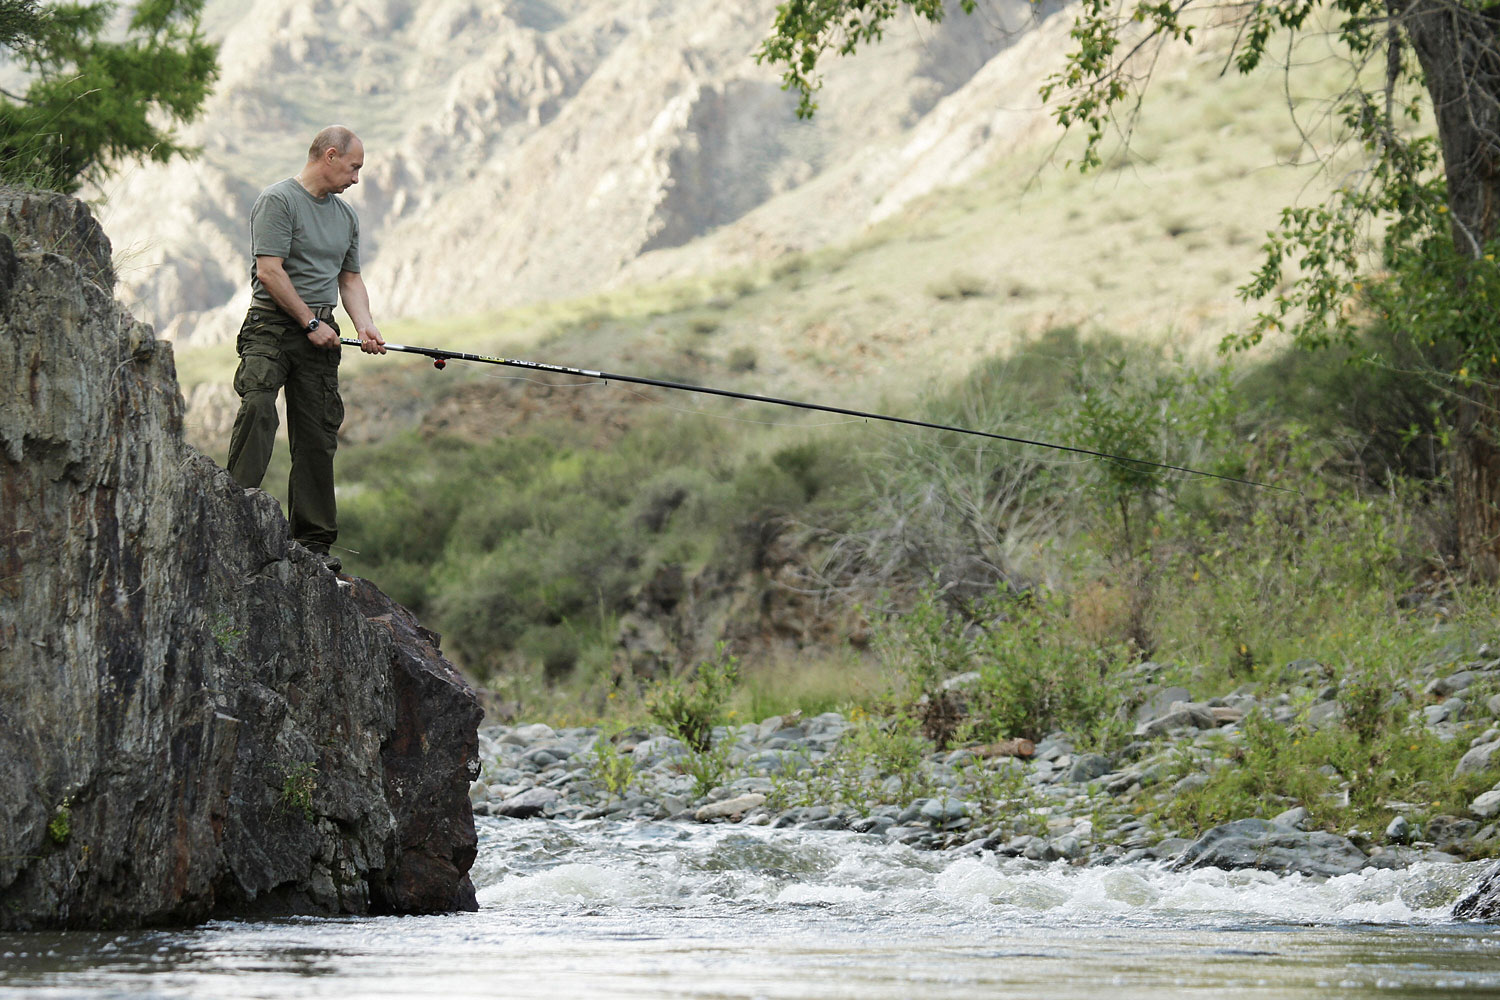 Putin hooked at least one fish from this perch, Aug. 3, 2009. (Inge Morath)